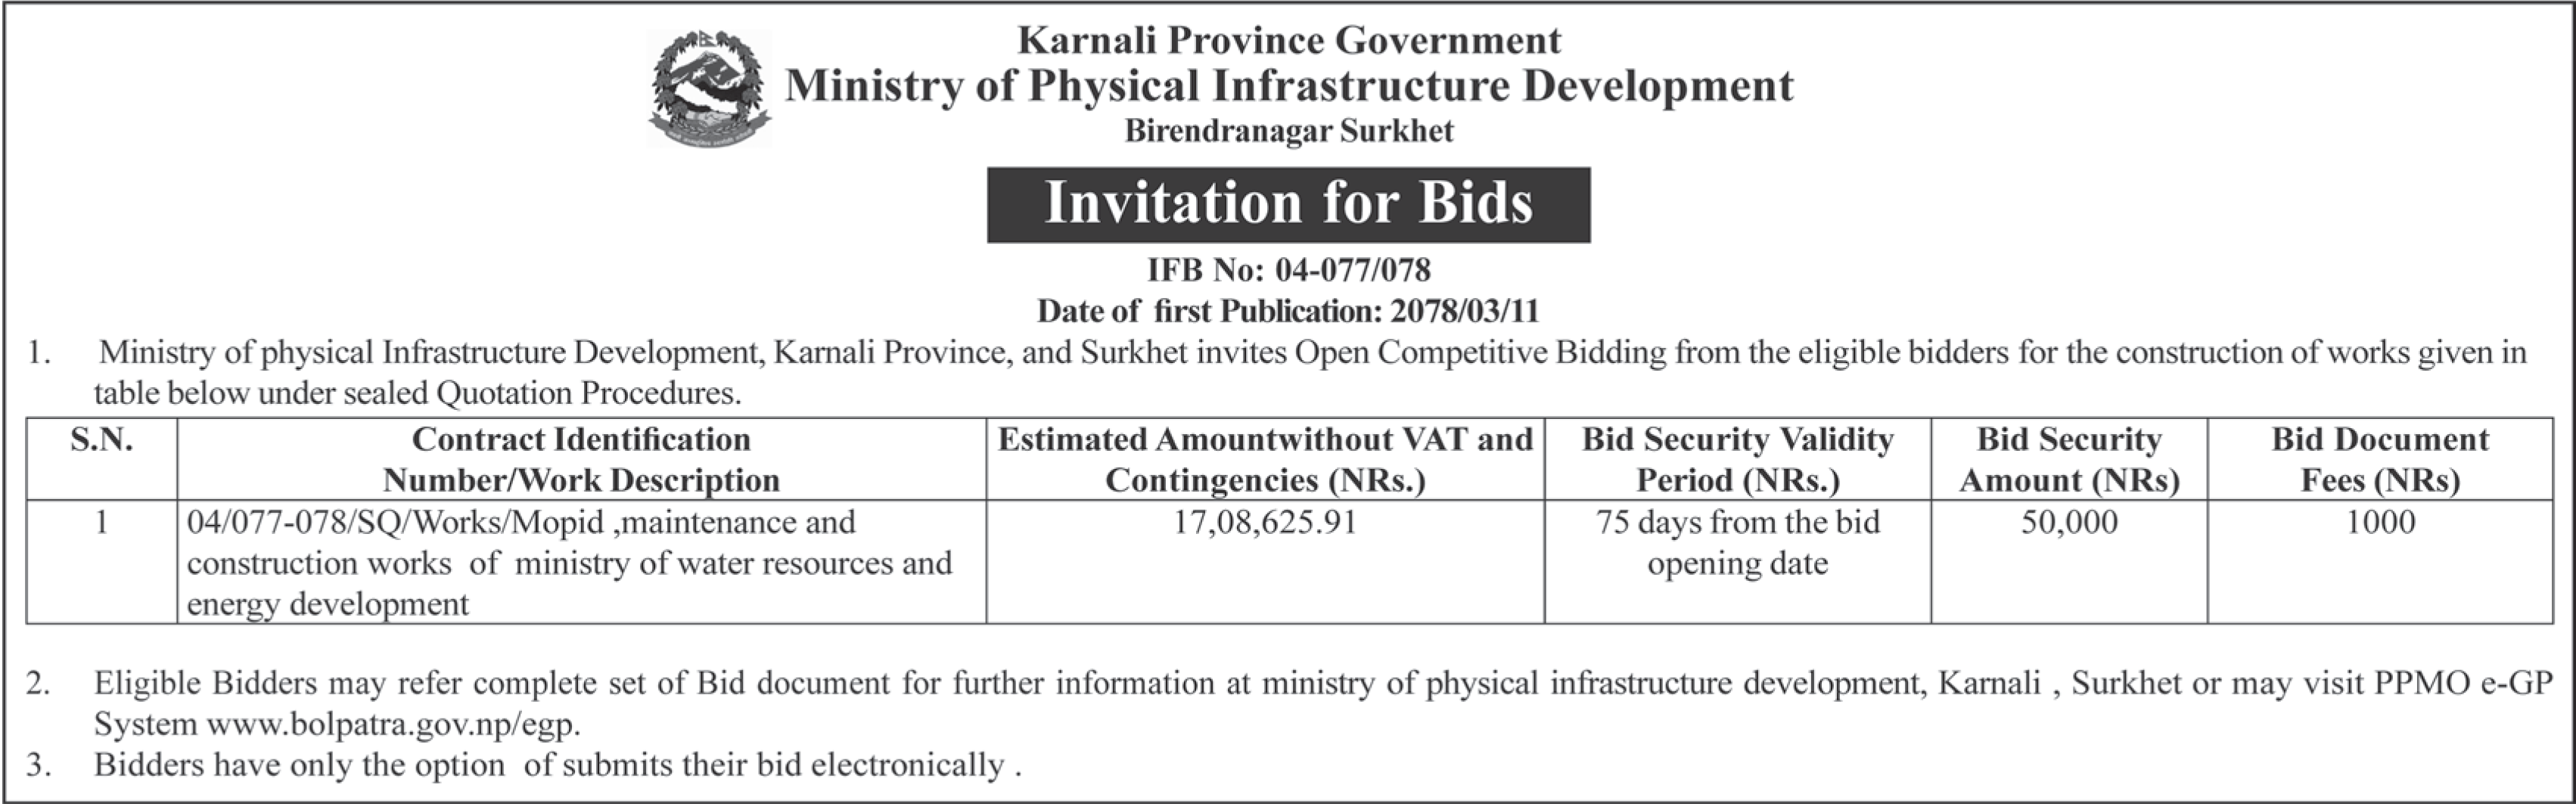 Karnali Province Government, Ministry of Physical Infrastructure Development, Birendranagar announces bid for construction works. Image 2(5).png